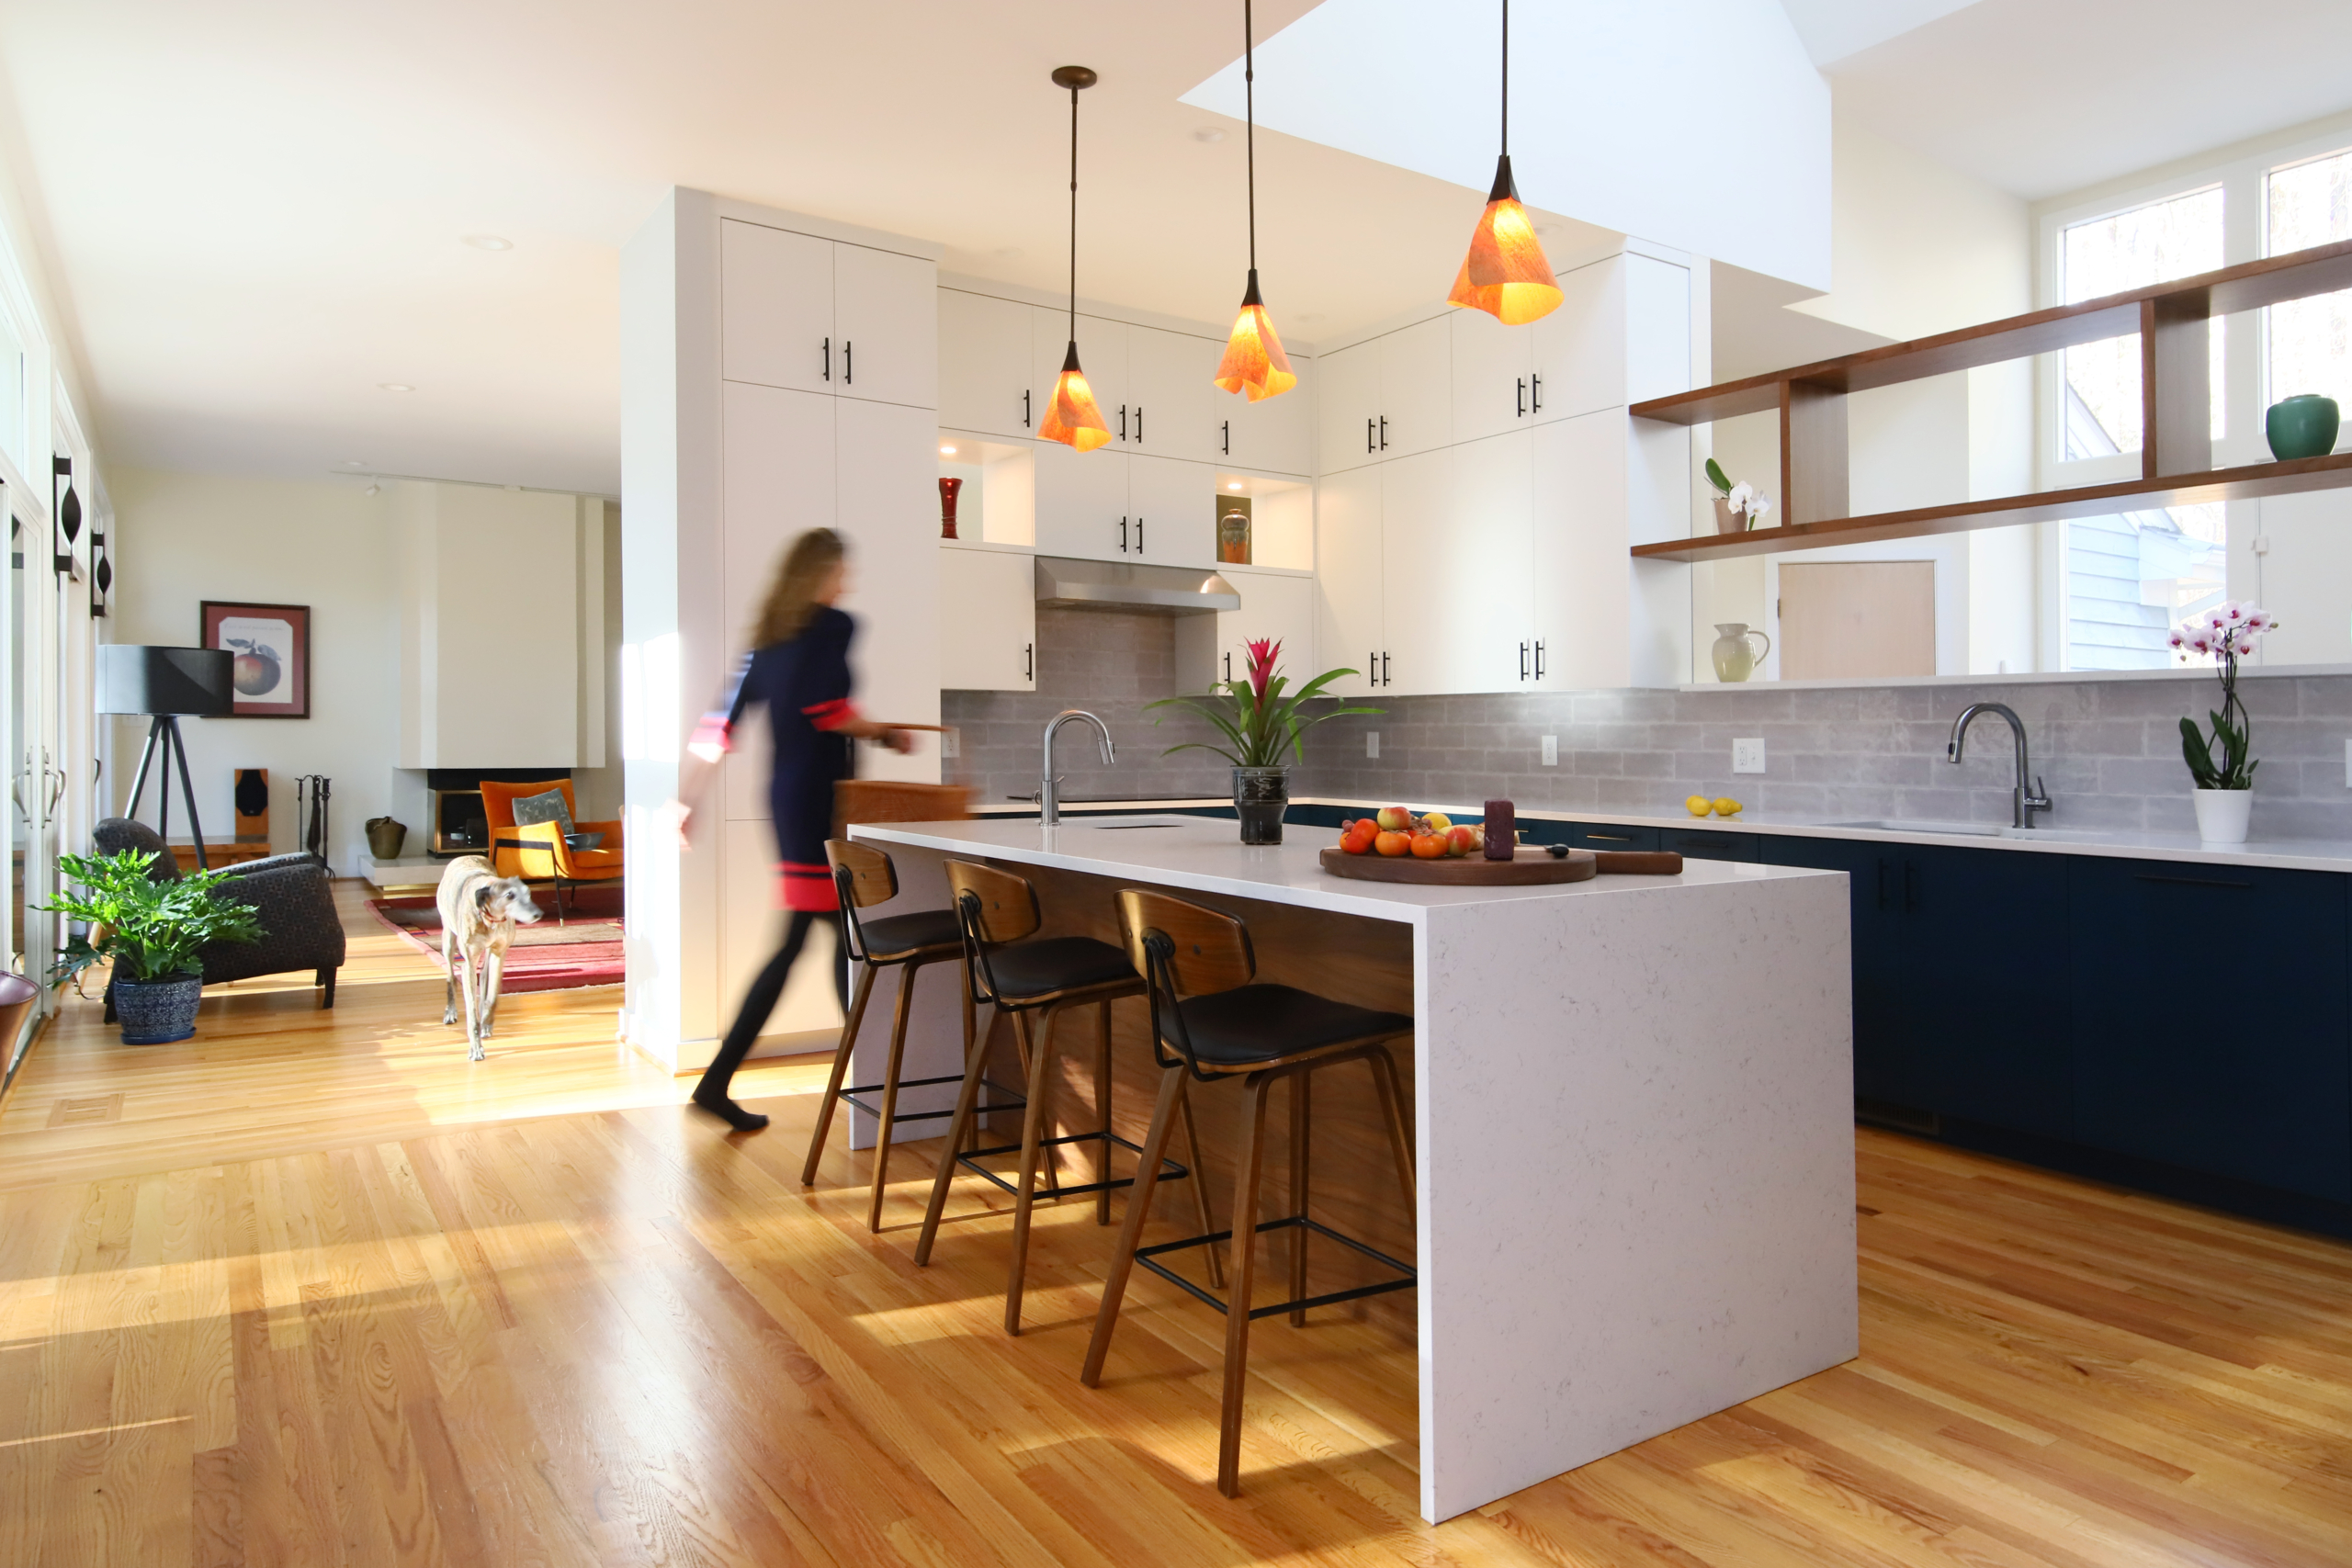 A woman walks through a sleek and contemporary kitchen filled with light